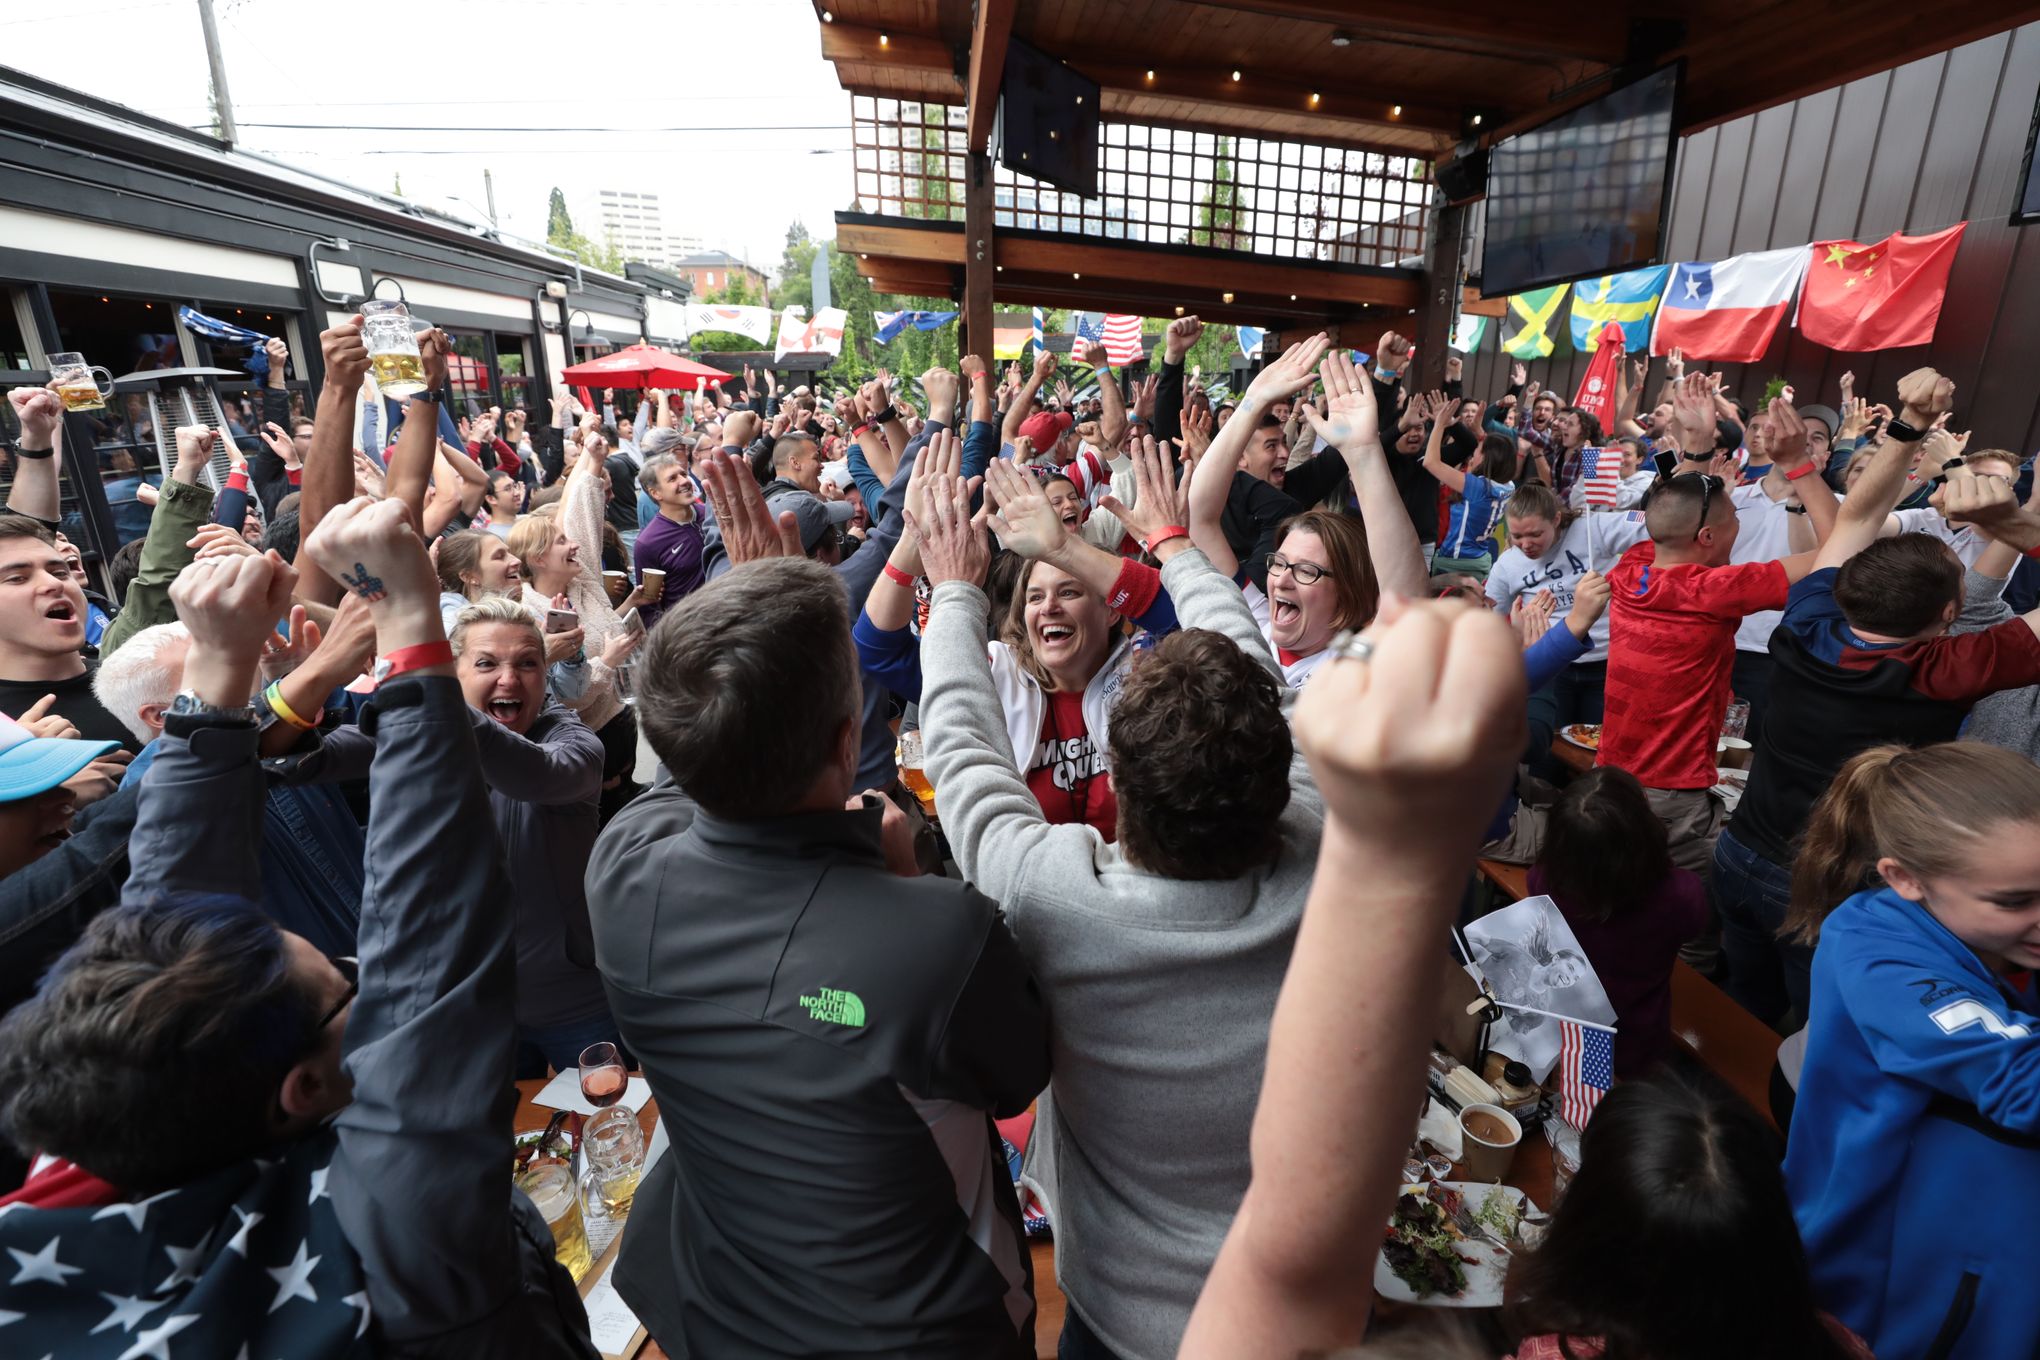 Hundreds of Seattle fans celebrate U.S. win at Women's World Cup watch